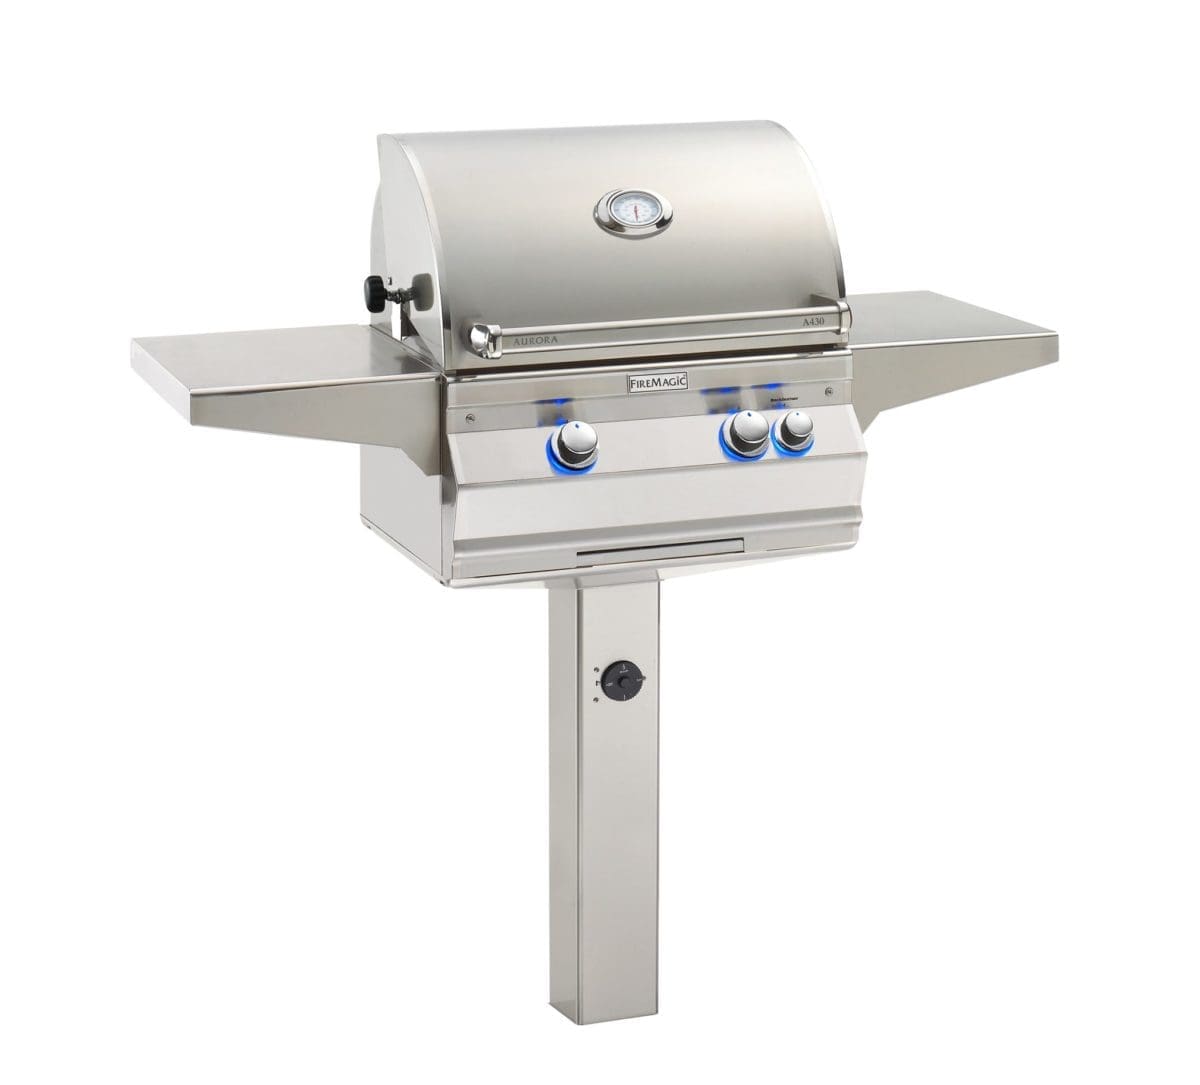 FireMagic A430s-G6 Aurora In-Ground Post Mount Grill, Analog